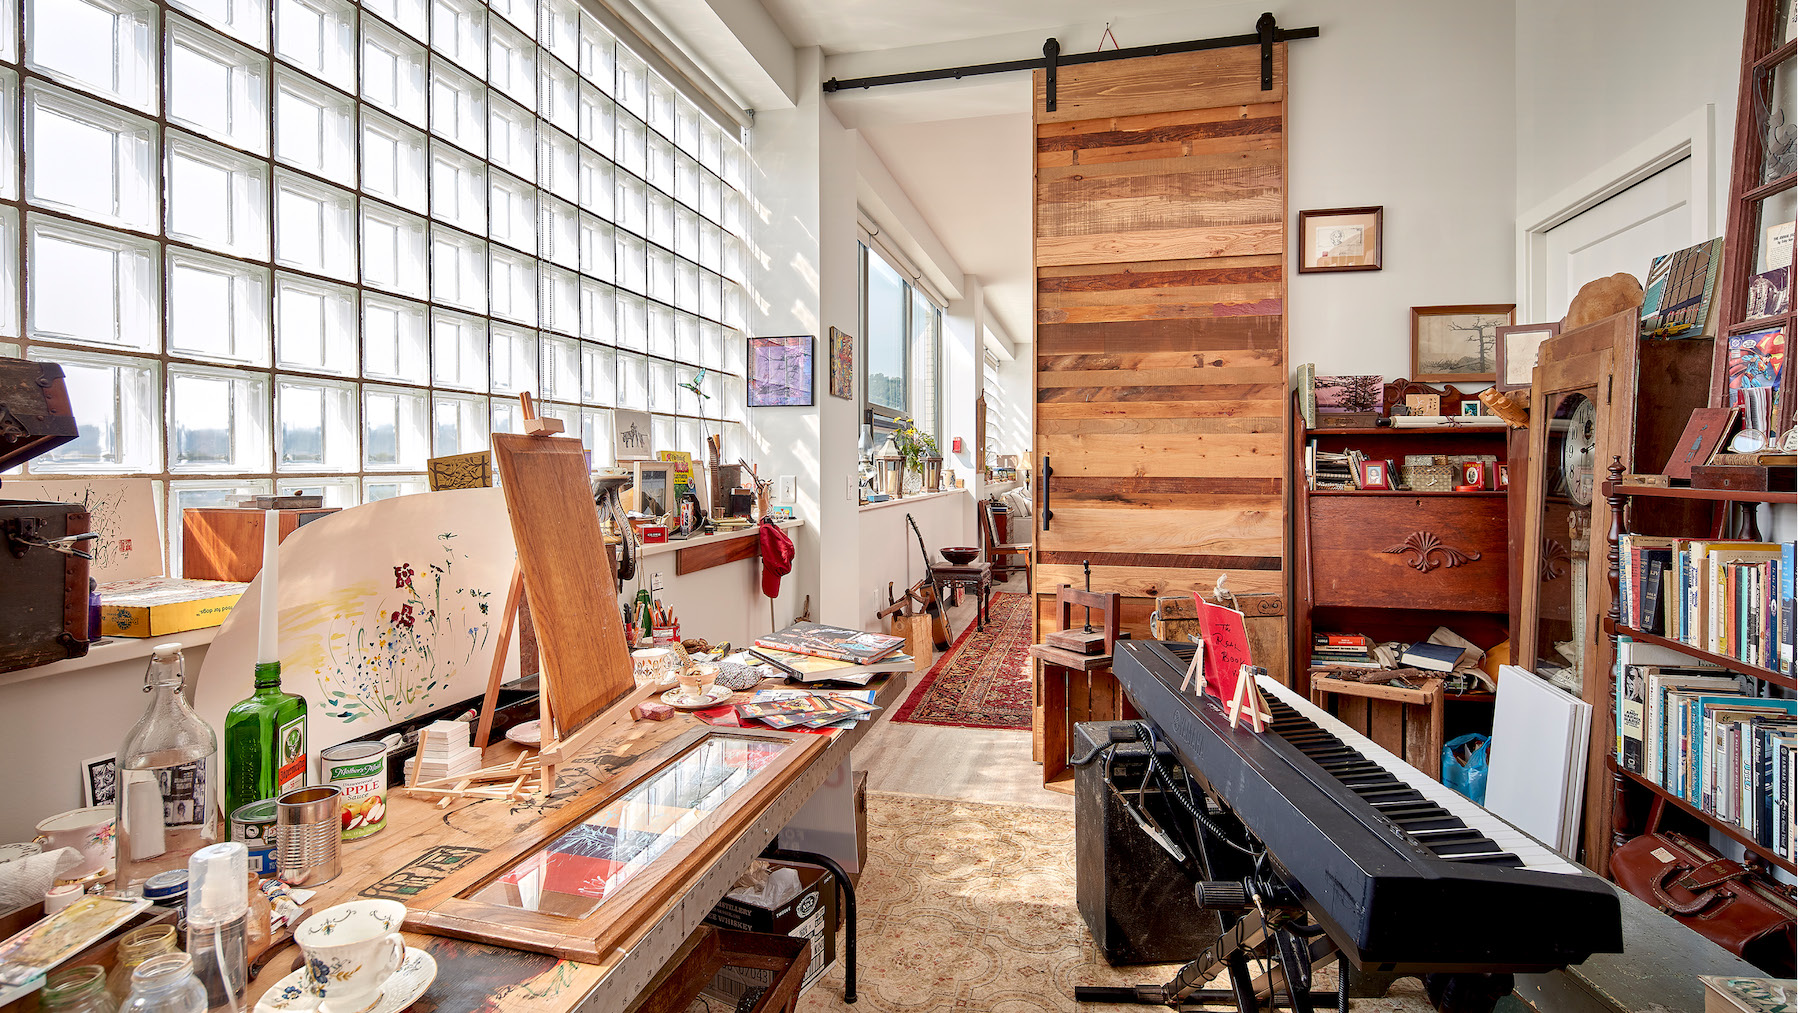 Ohringer Arts. The apartment layouts prioritize natural light and views with a refined material palette that allows the artists’ personalities to take center stage. Photo courtesy Ed Massery